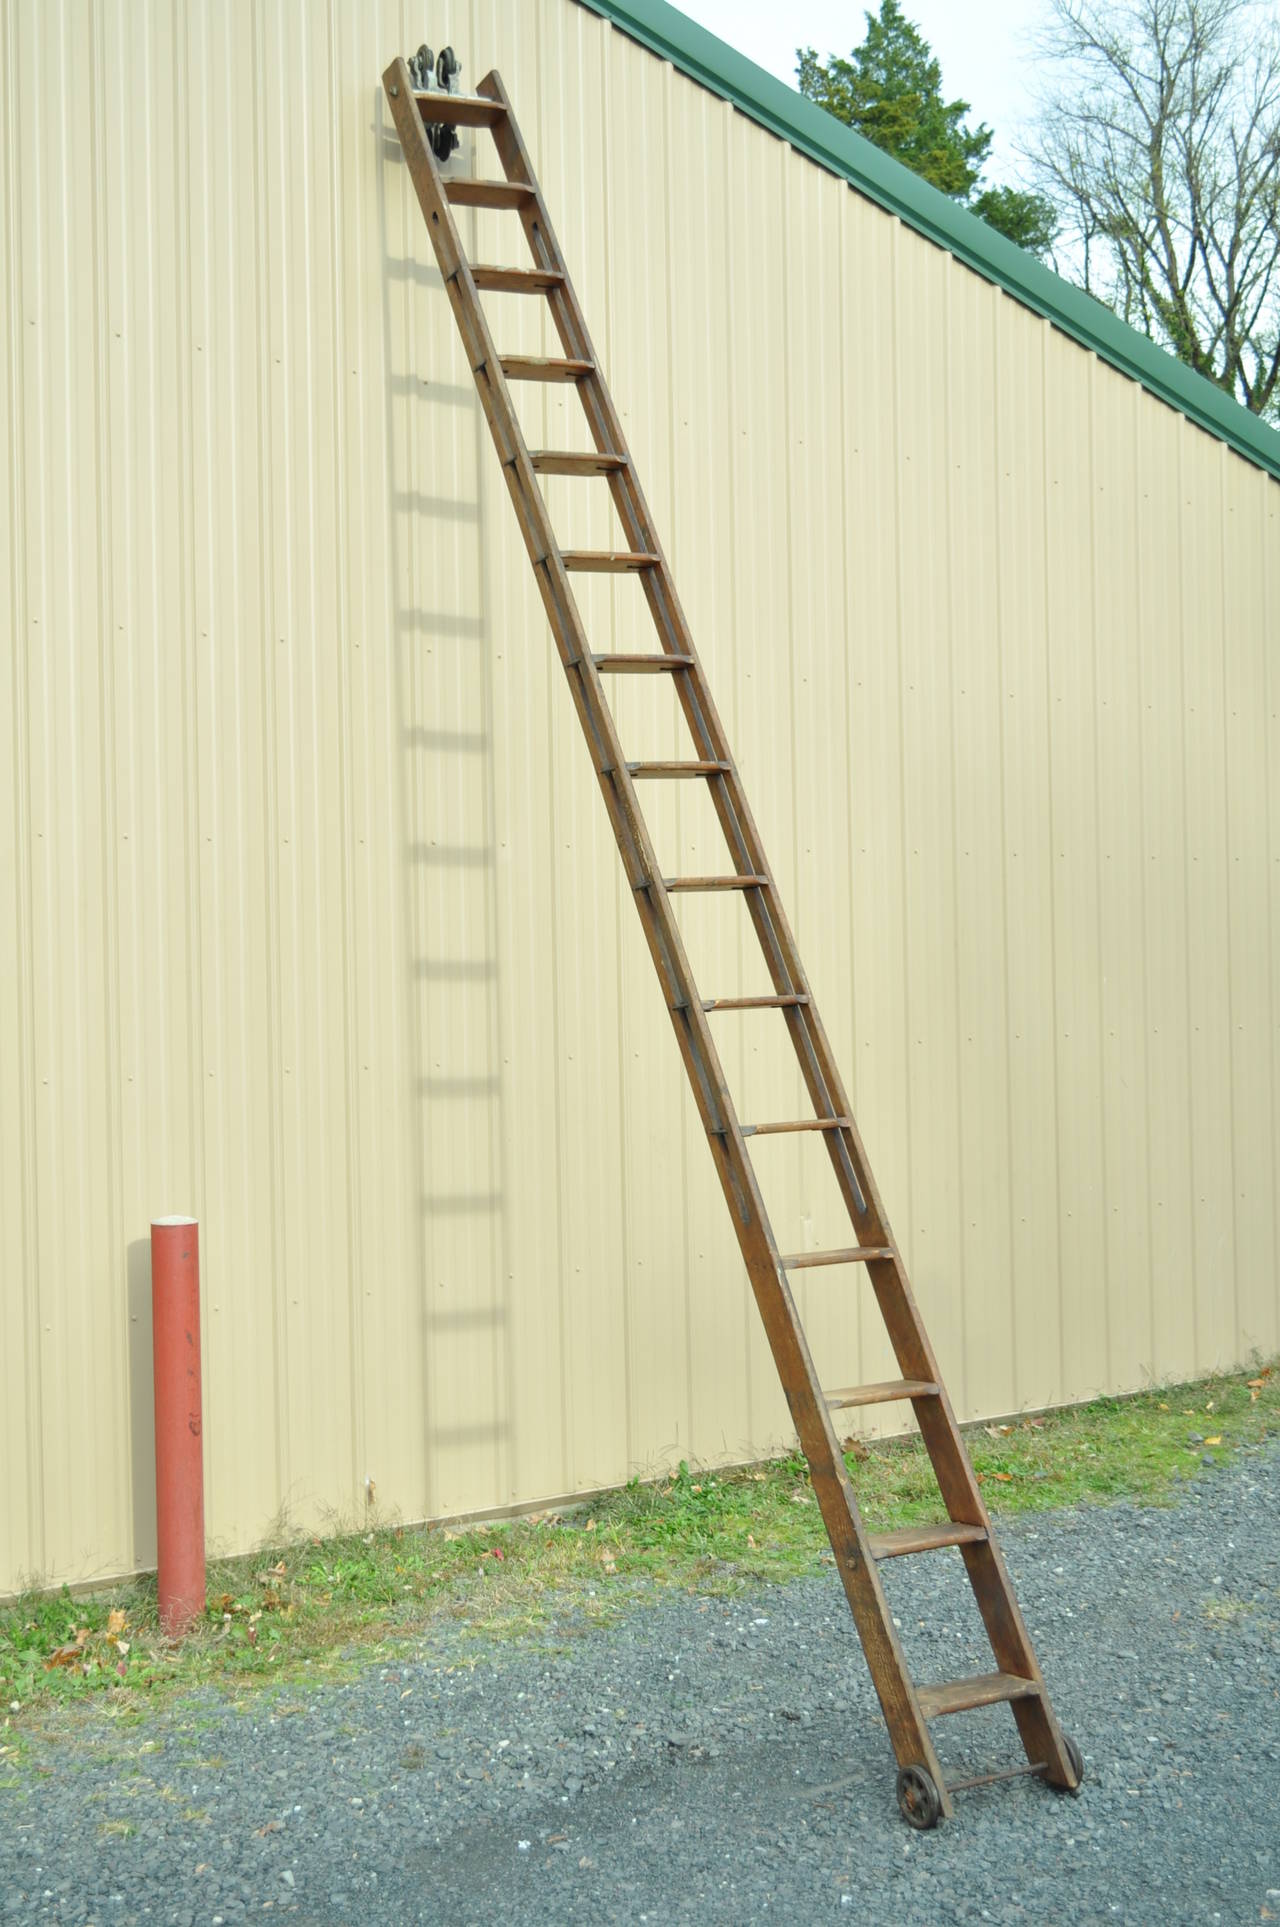 Stunning 19th Century F.E. Myers & Bros. Rustic Ladders with heavy duty, cast iron, rolling hardware attached to the top of each ladder. These original antique pieces came out of a NJ General Store and were in use for over 100 years. Each ladder has